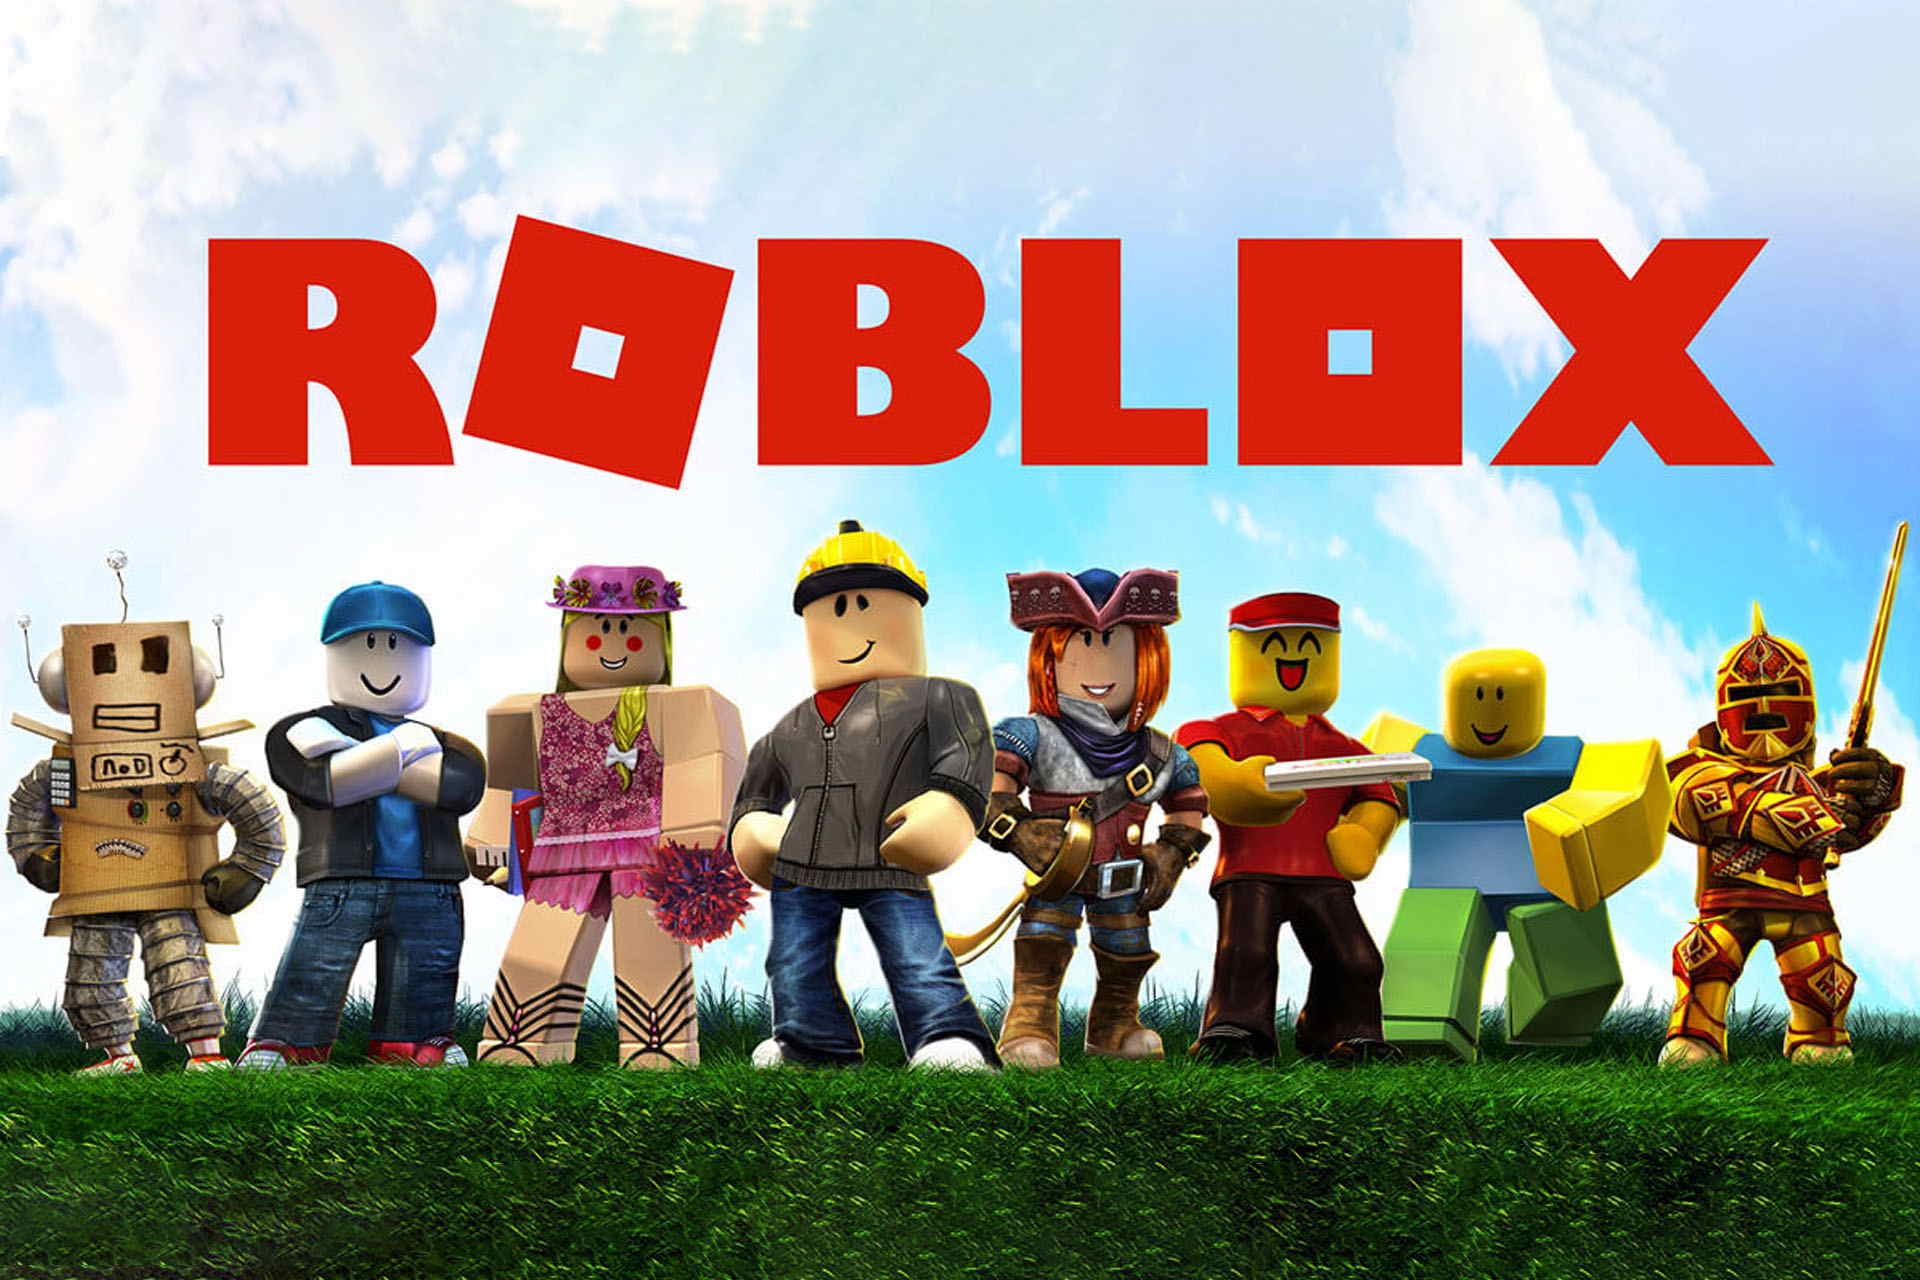 Roblox Background For Ipad